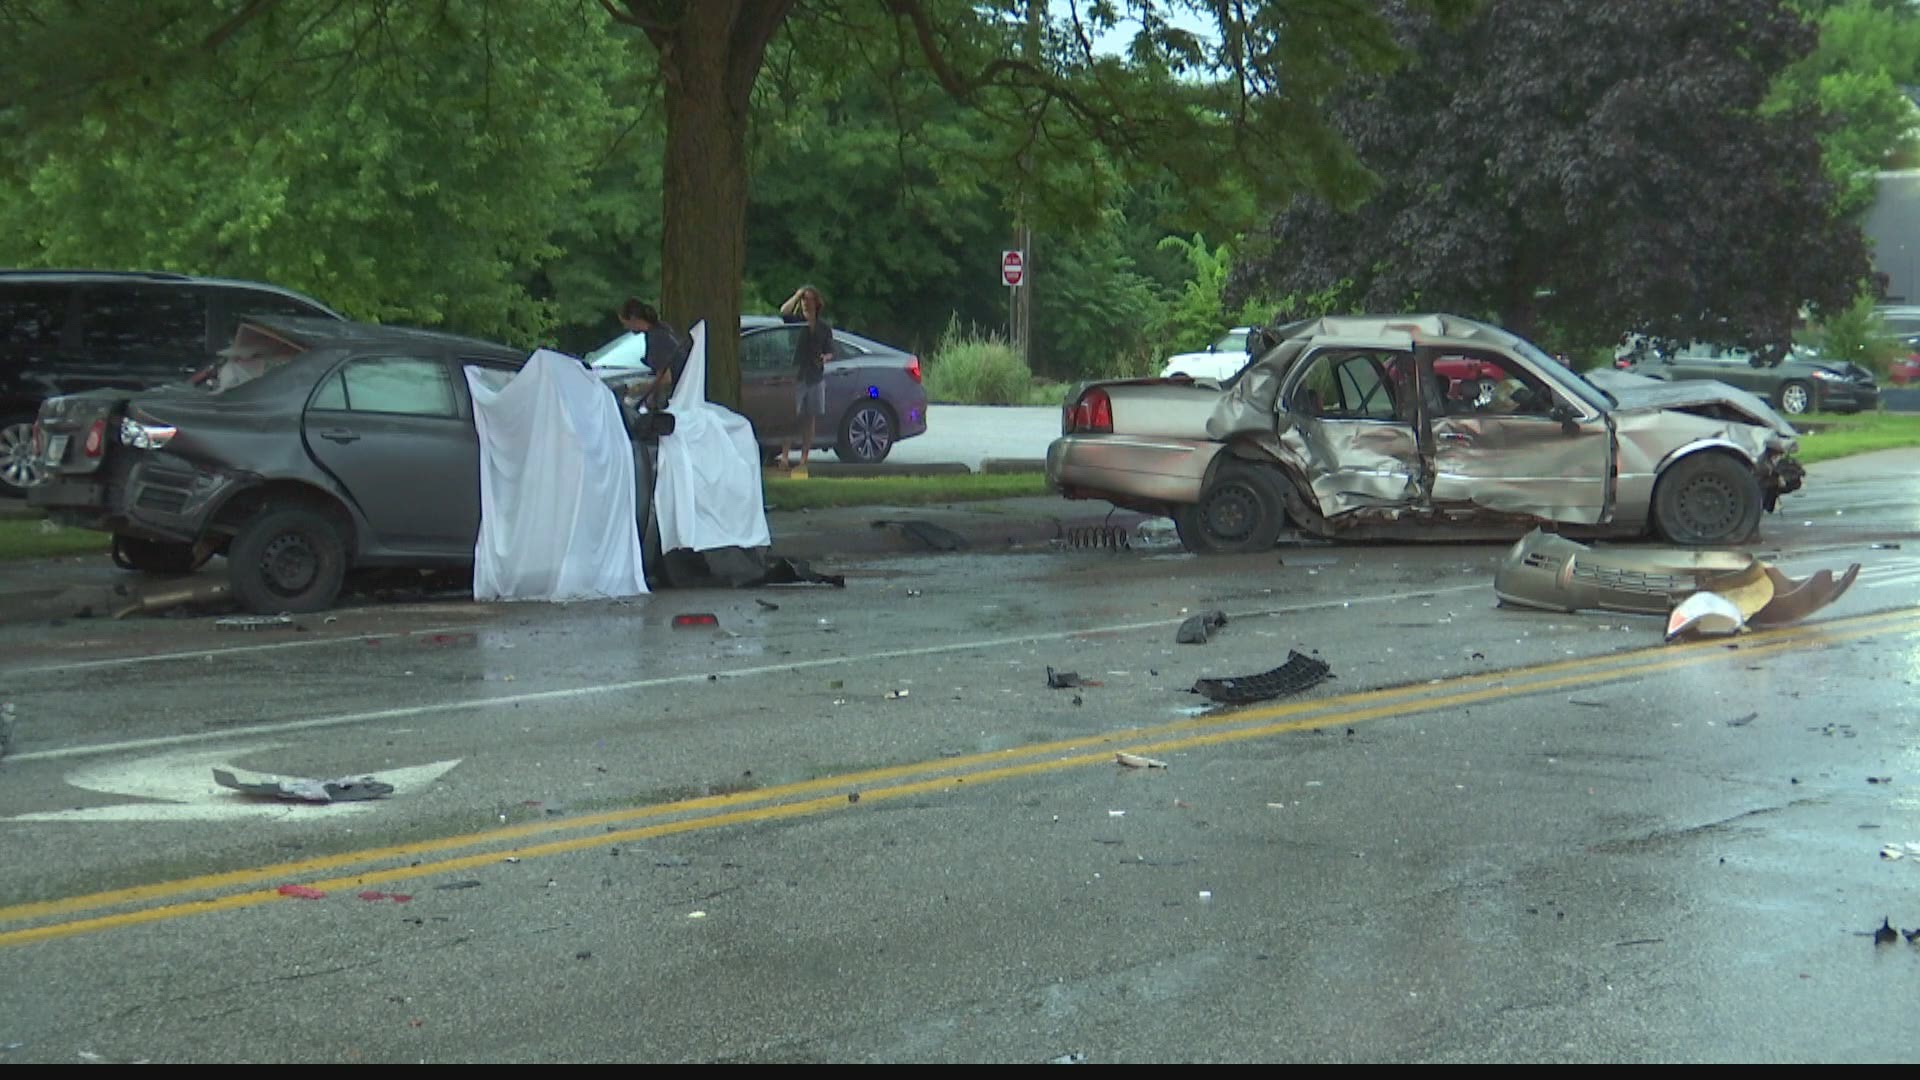 A car collided with two other vehicles in the Thursday evening crash.